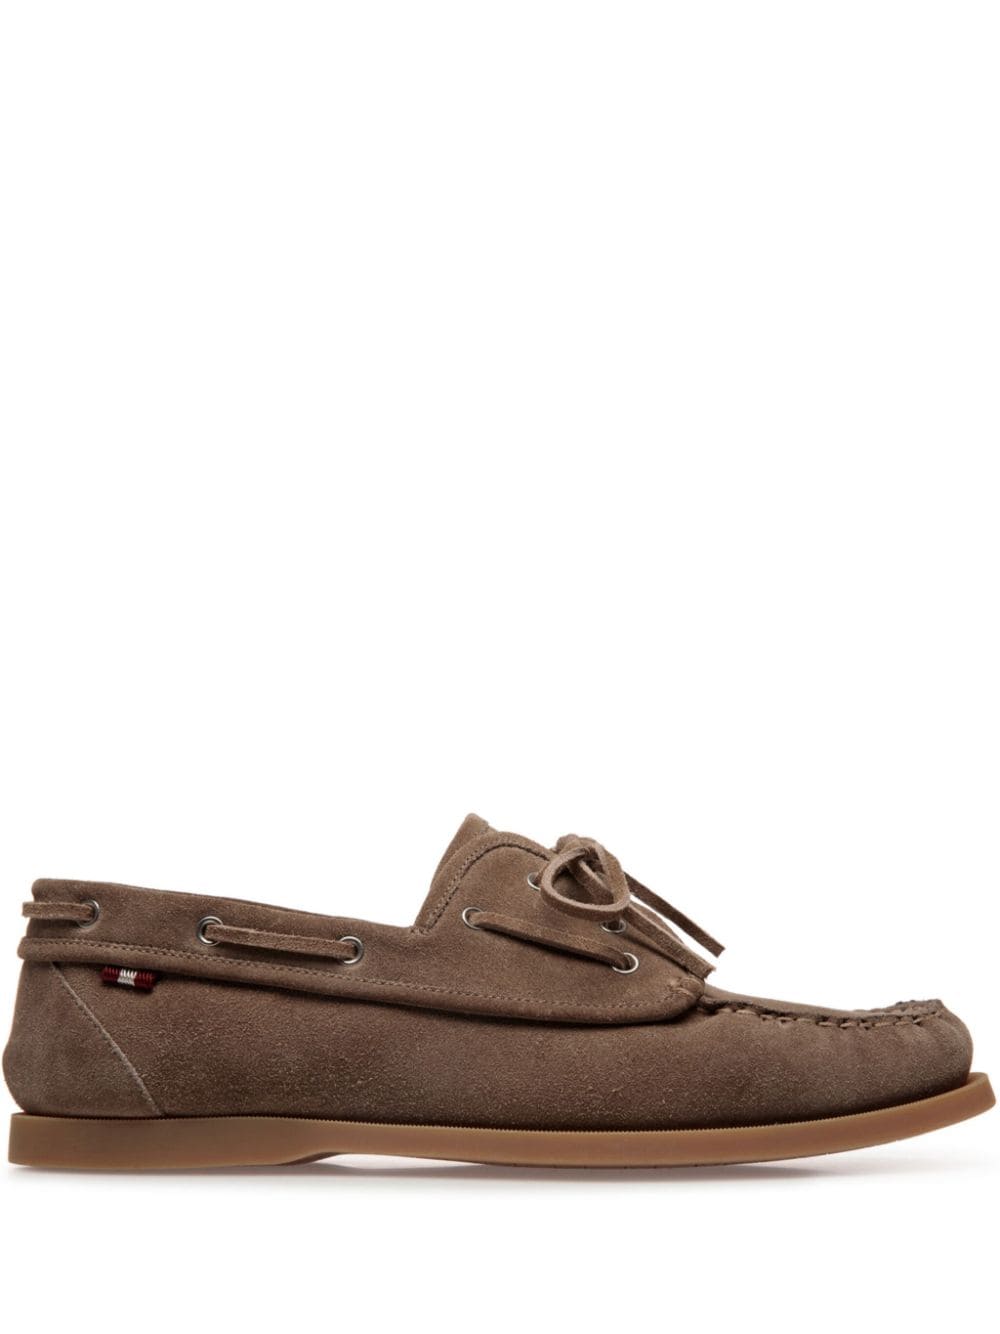 Bally lace-up suede loafers - Brown von Bally